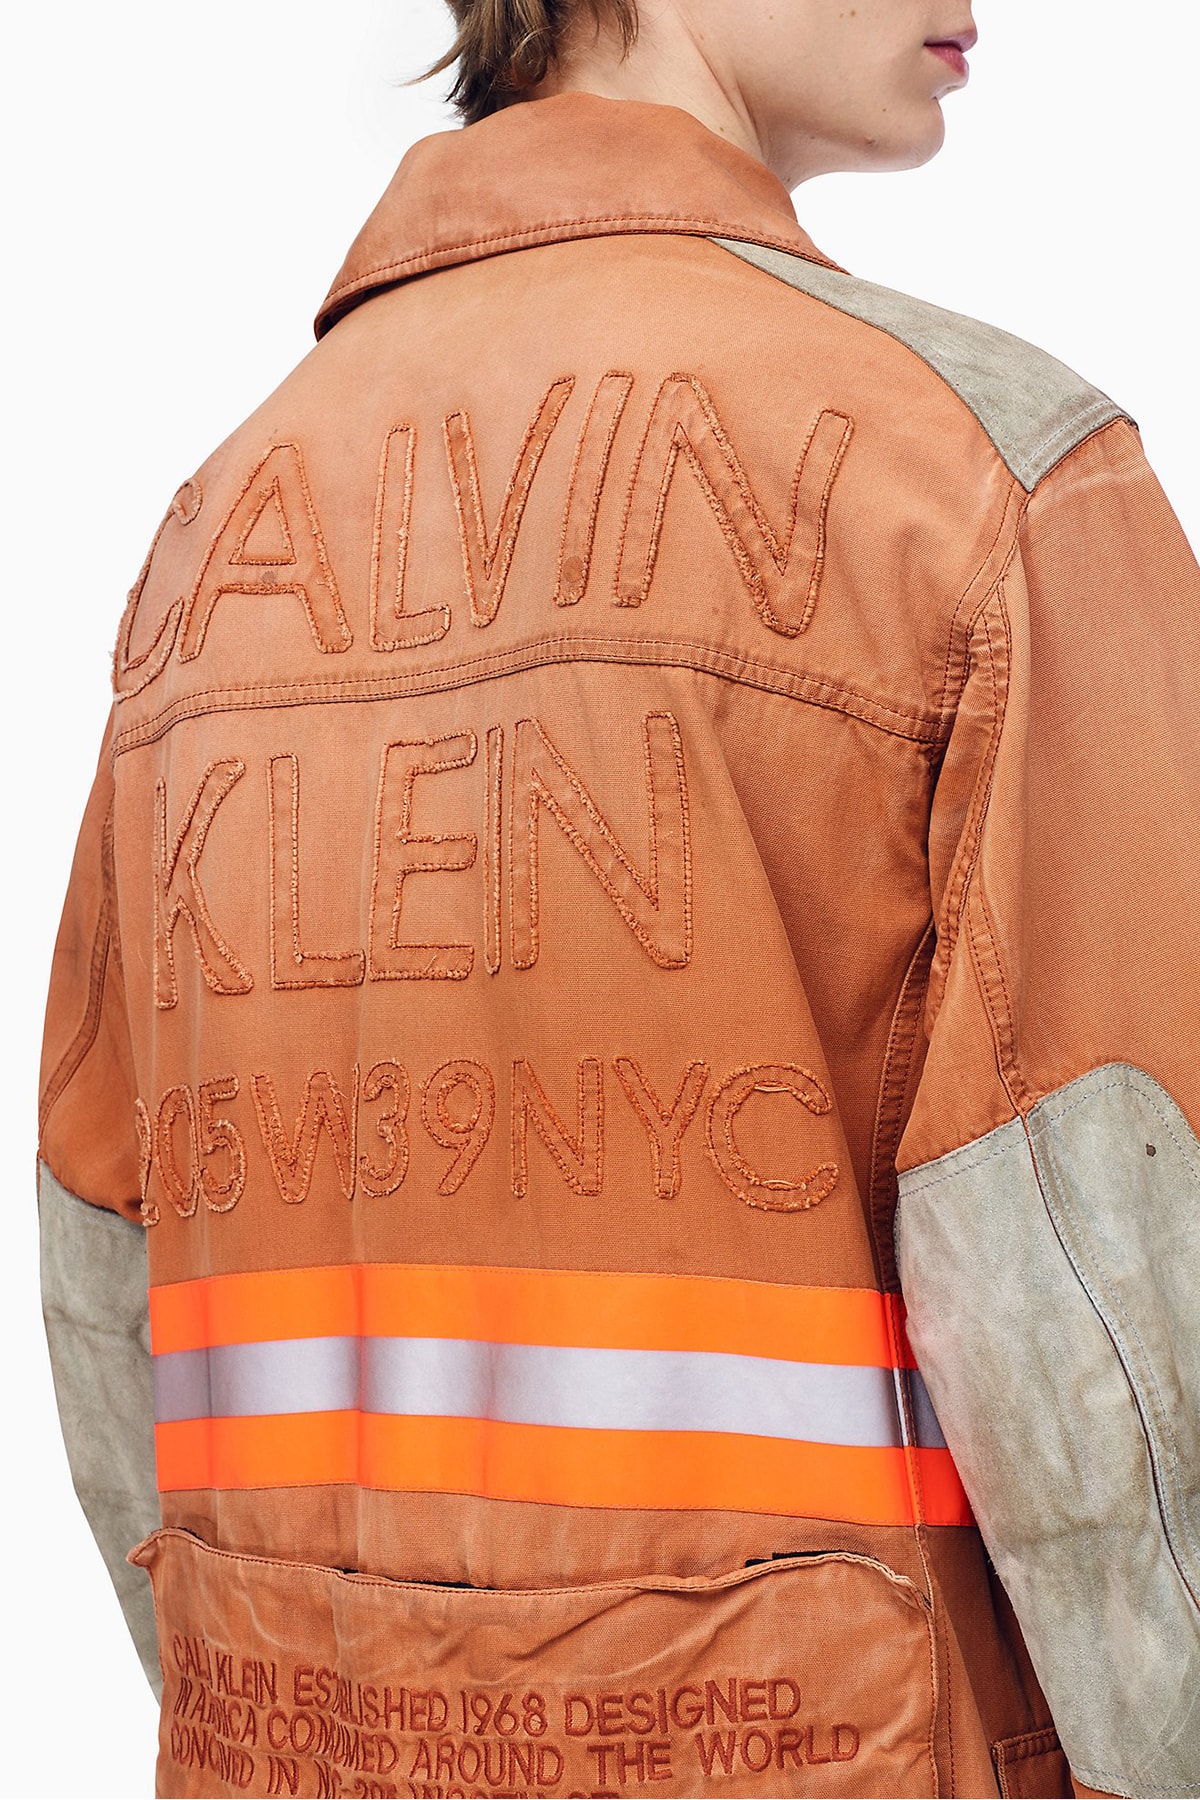 calvin klein 205w39nyc fireman man fighter distressed jacket coat jumpsuit orange yellow red outerwear ankle boot black white leather fall winter 2018 drop release date pre order buy sale shop sell